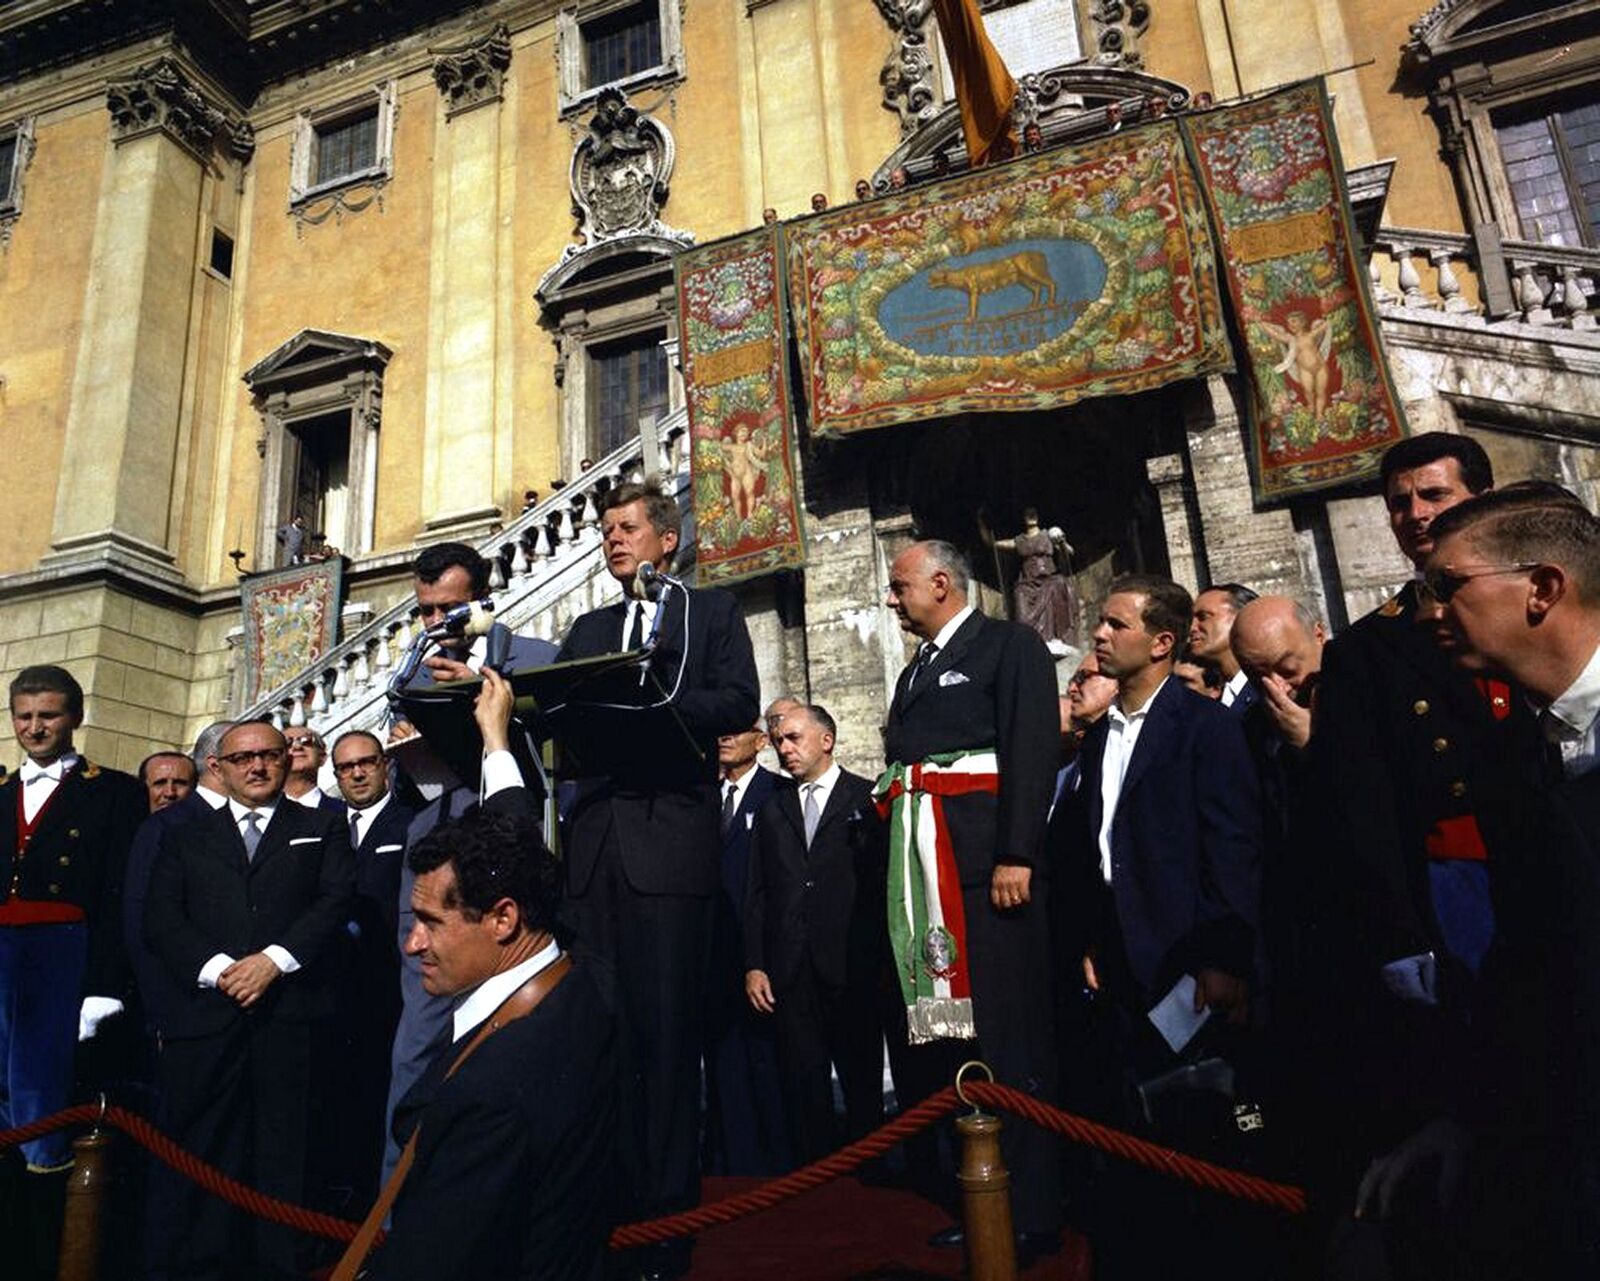 1963 PRESIDENT KENNEDY Speaks at City Hall in Rome PHOTO (164-X)